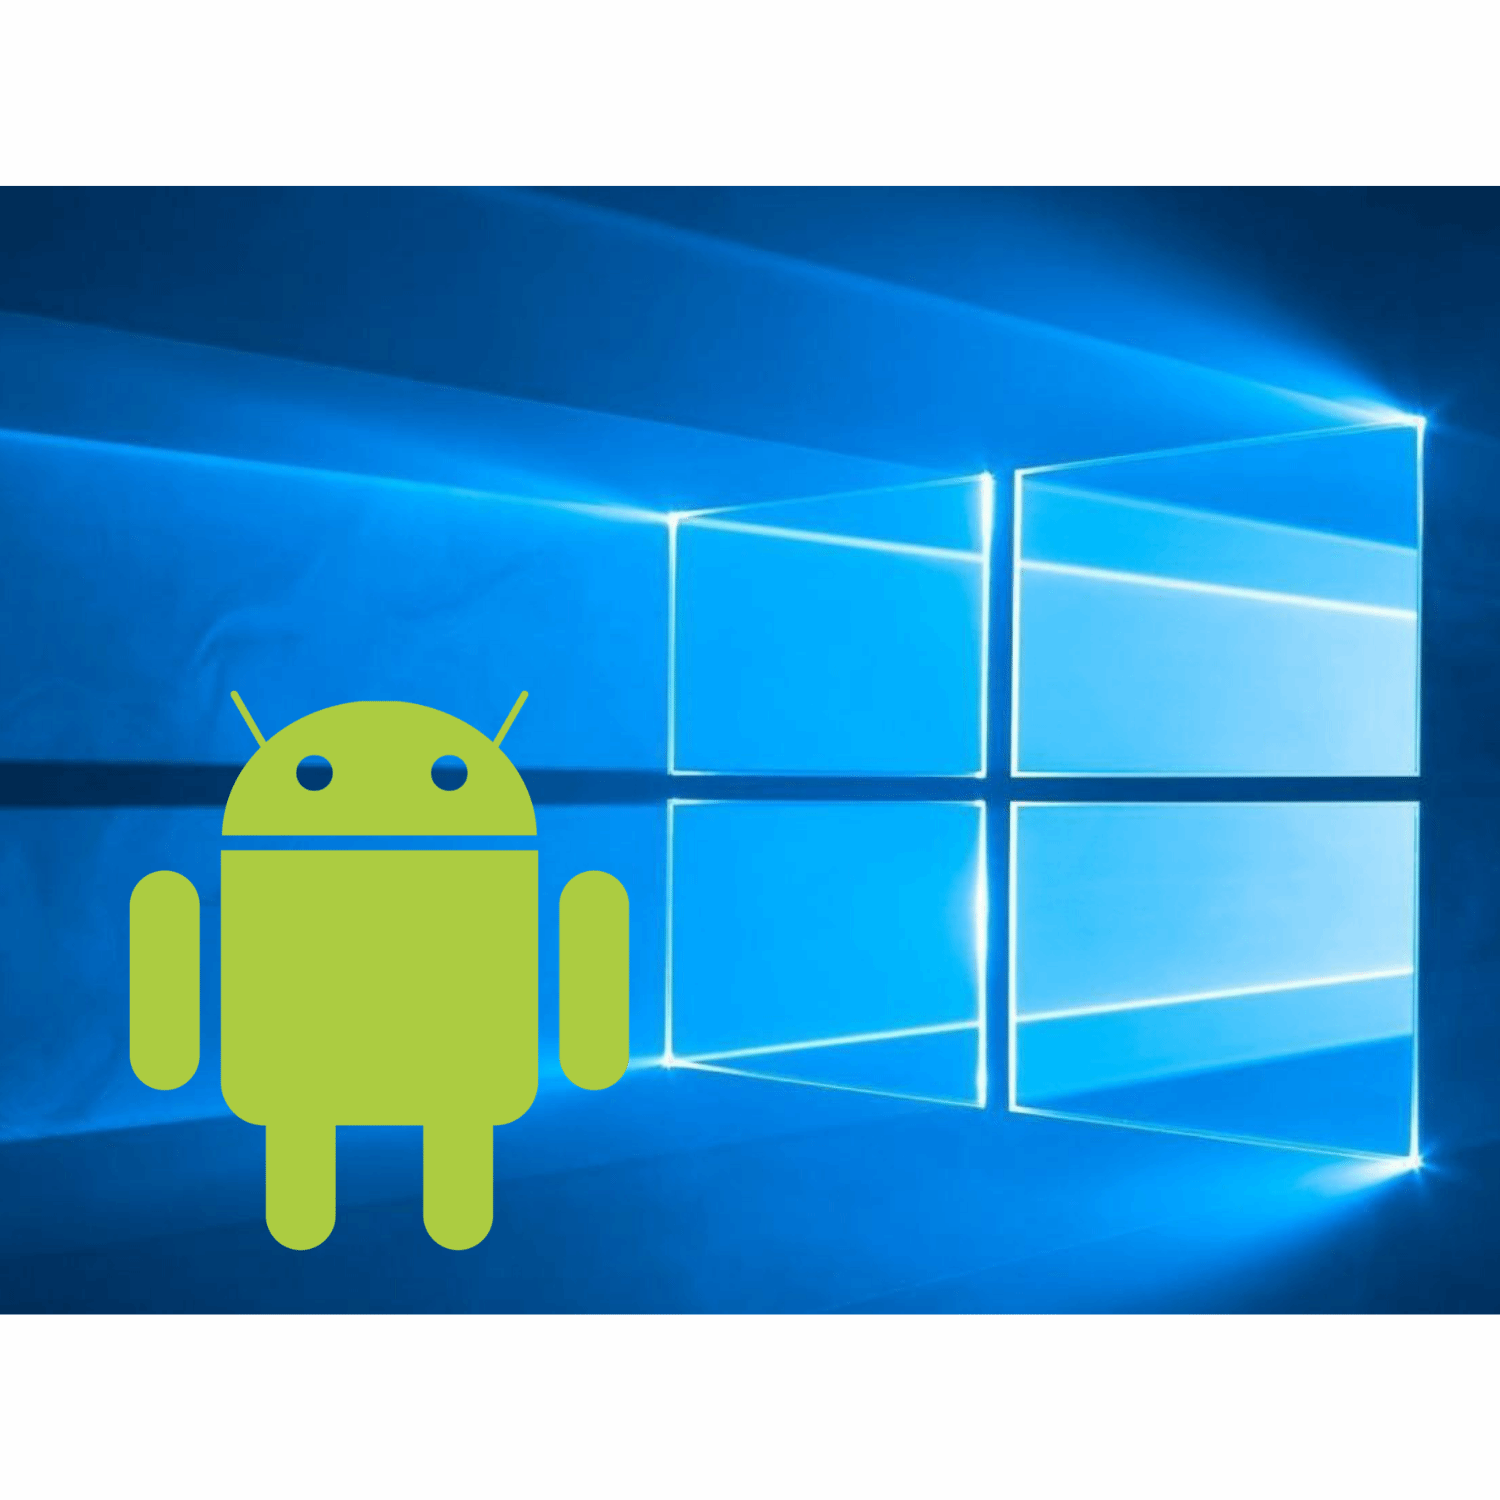 Soon you will be able to use Android Apps on Windows 10